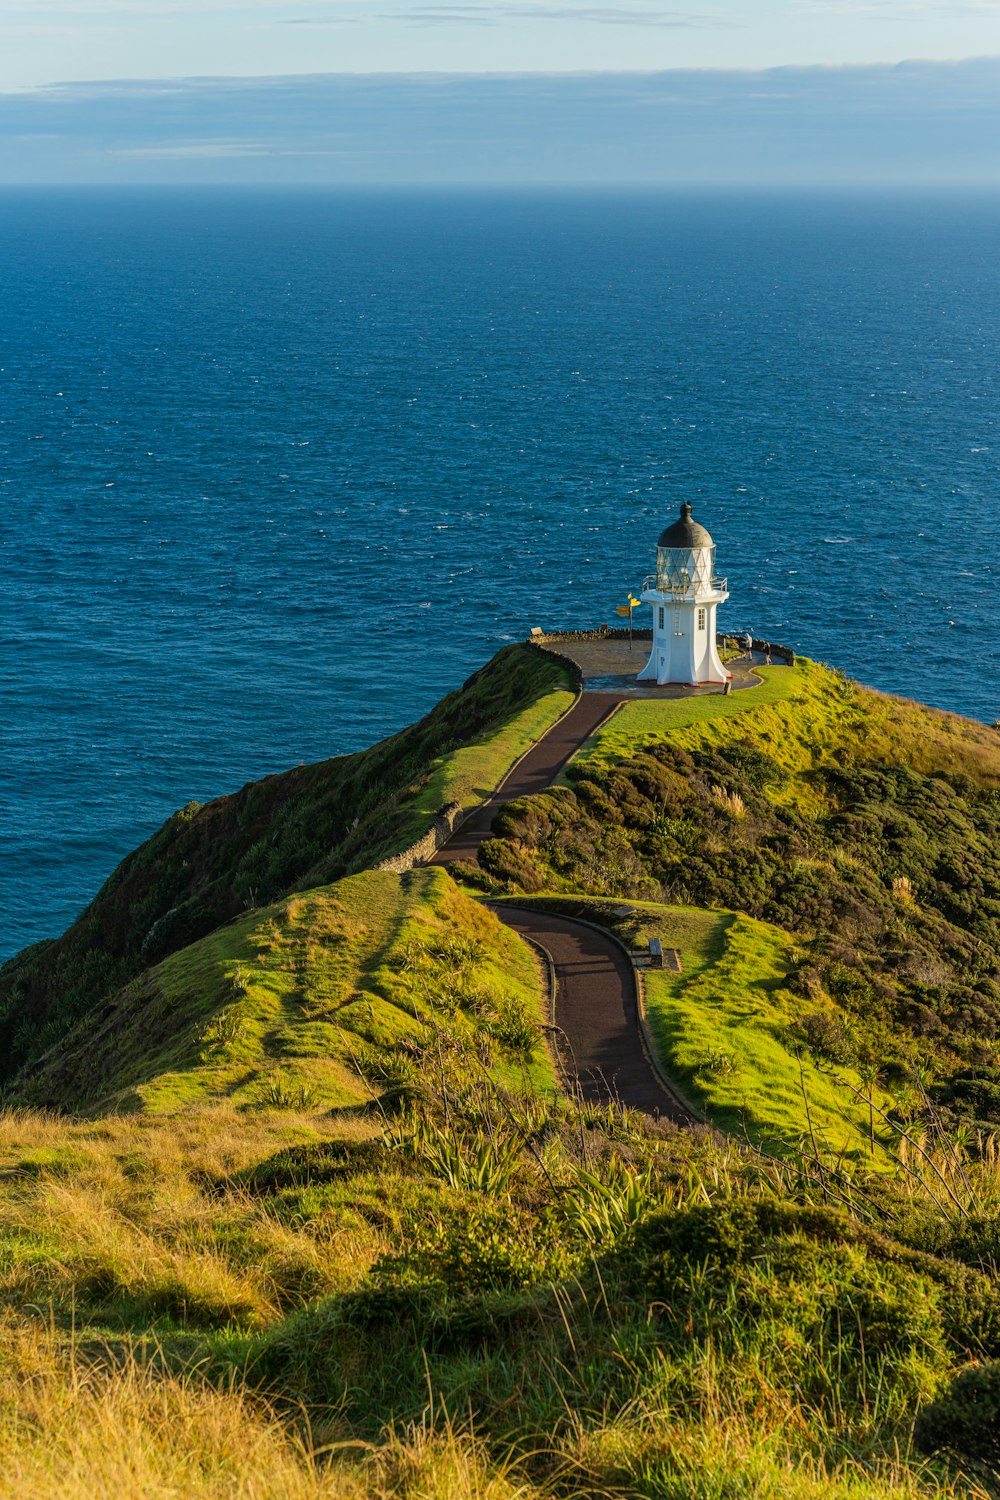 a lighthouse on a grassy hill overlooking the ocean